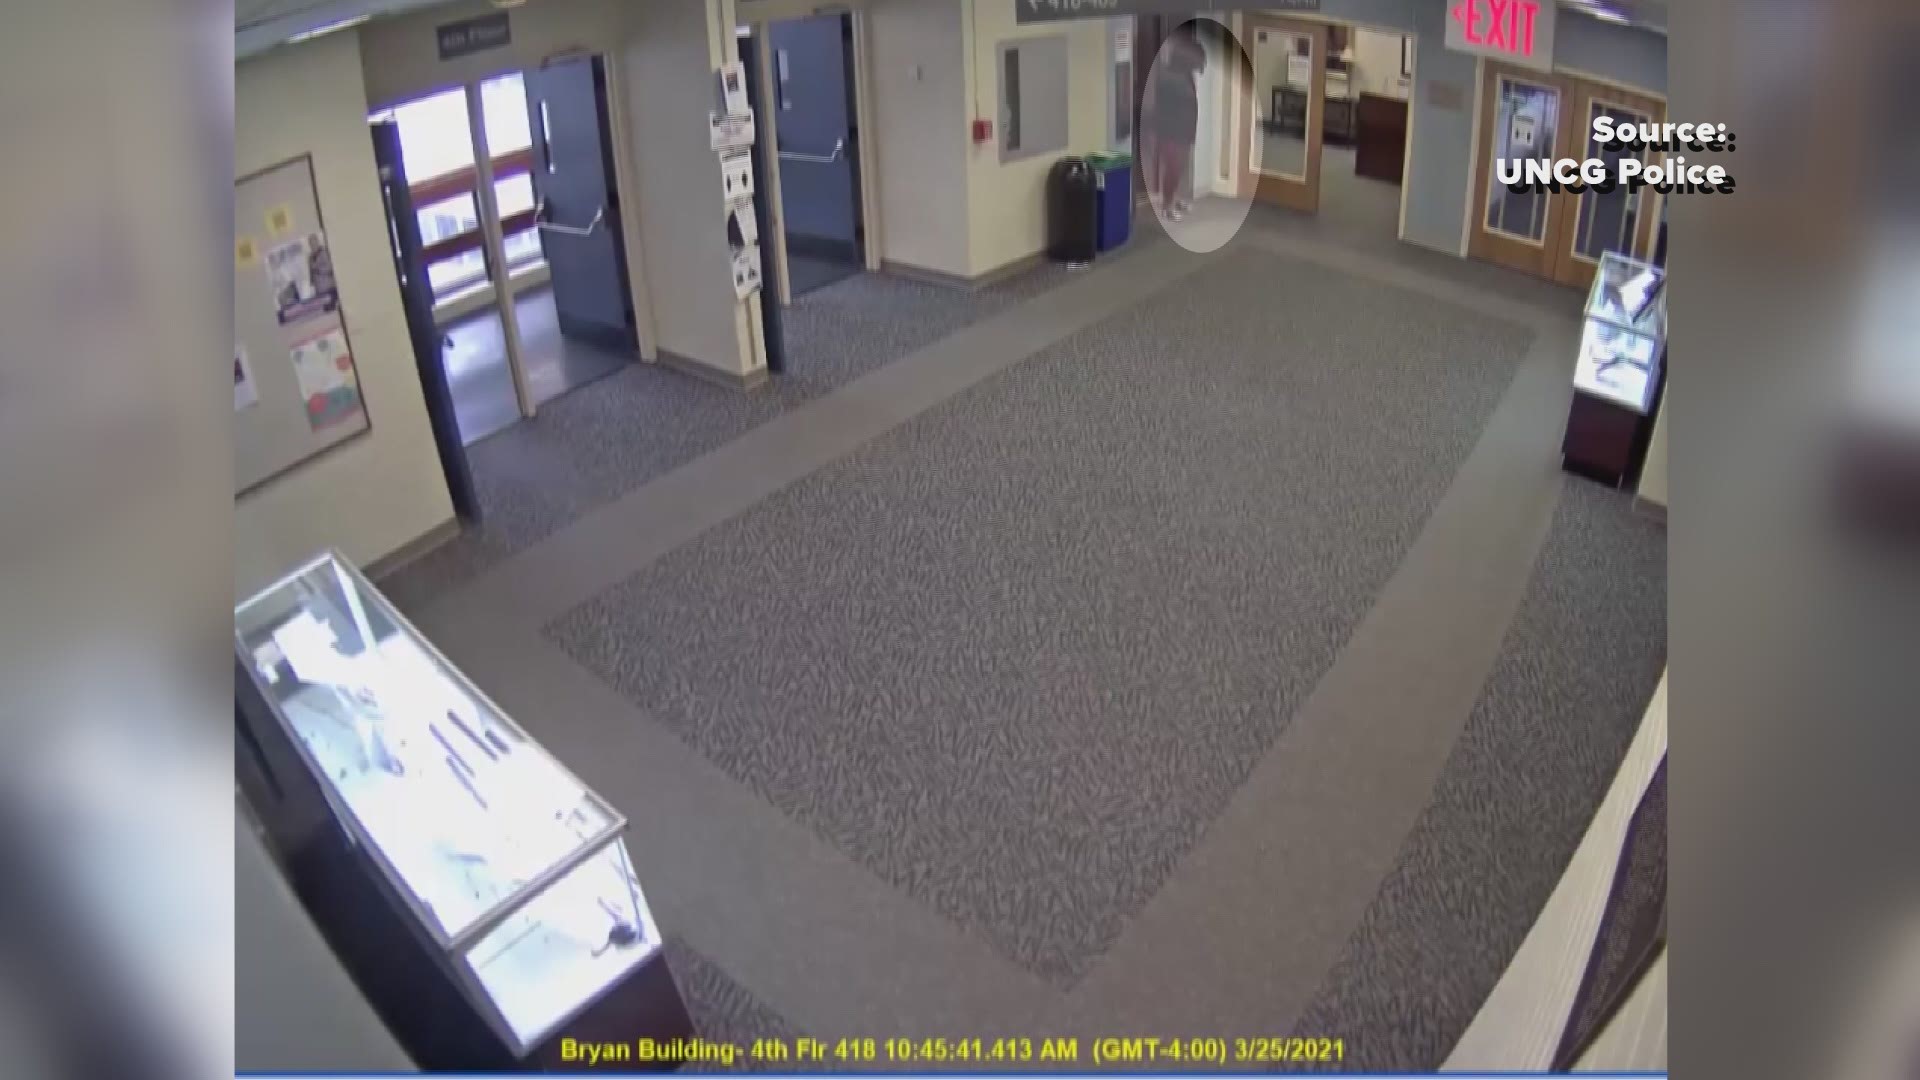 UNC Greensboro Police said a woman entered several buildings on campus stealing debit and credit cards from offices.